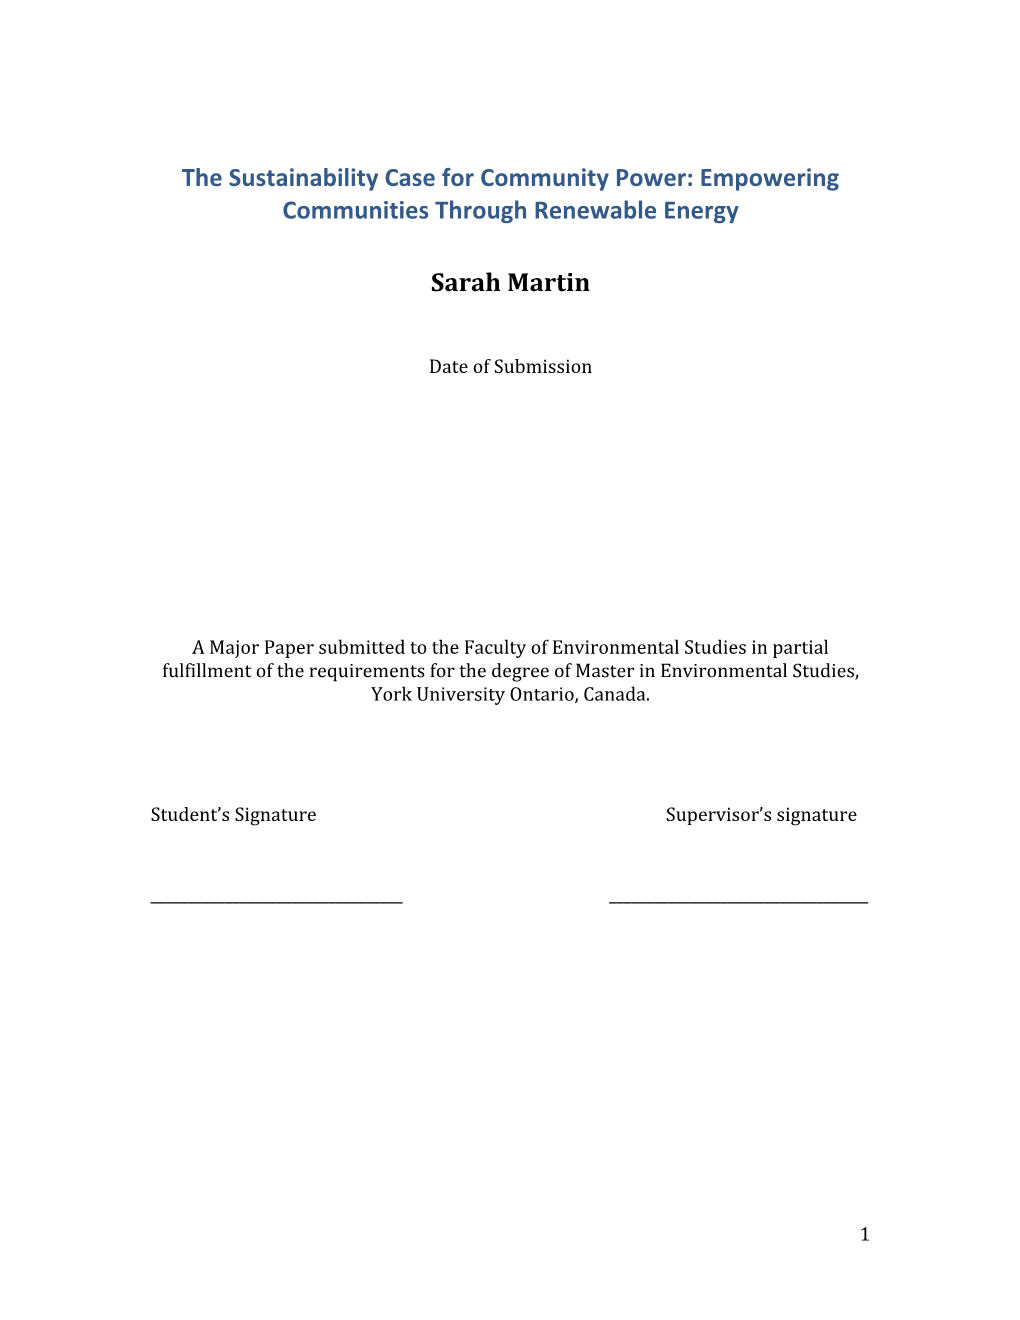 The Sustainability Case for Community Power: Empowering Communities Through Renewable Energy